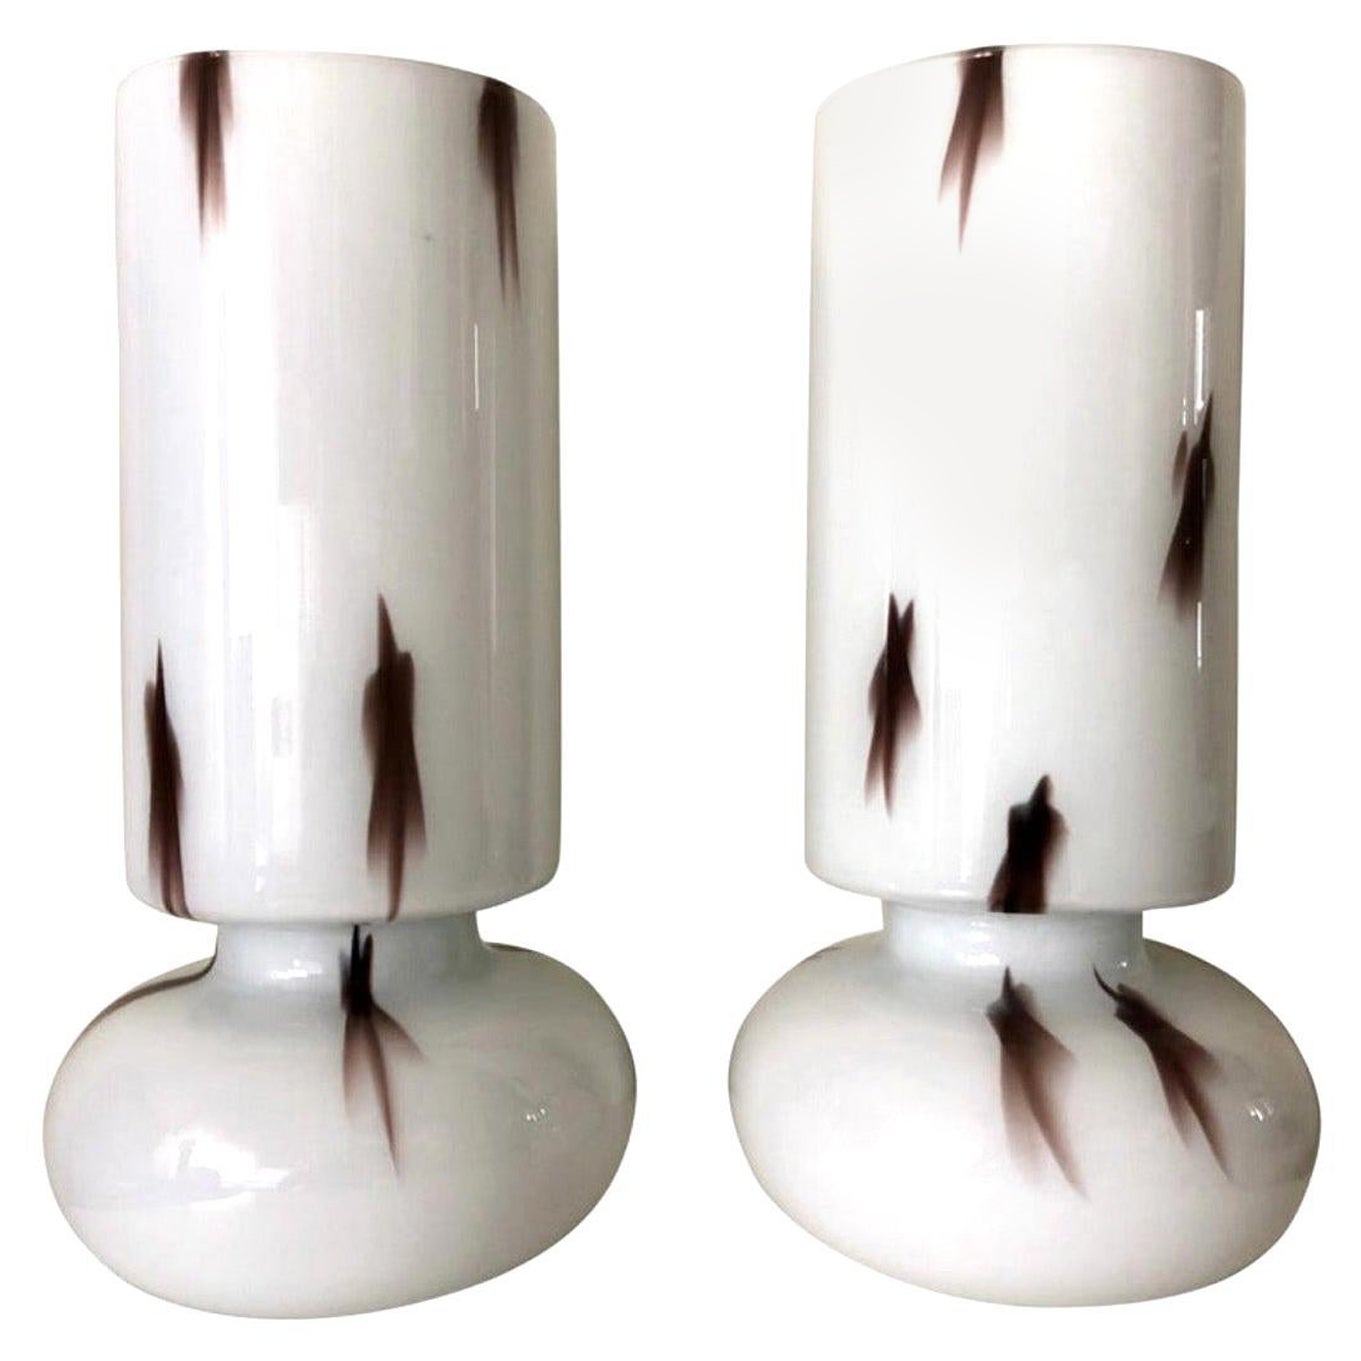 Pair of Mid Century Opaline Glass Table Lamps by Fiamma S.A. Barcelona, 1970s